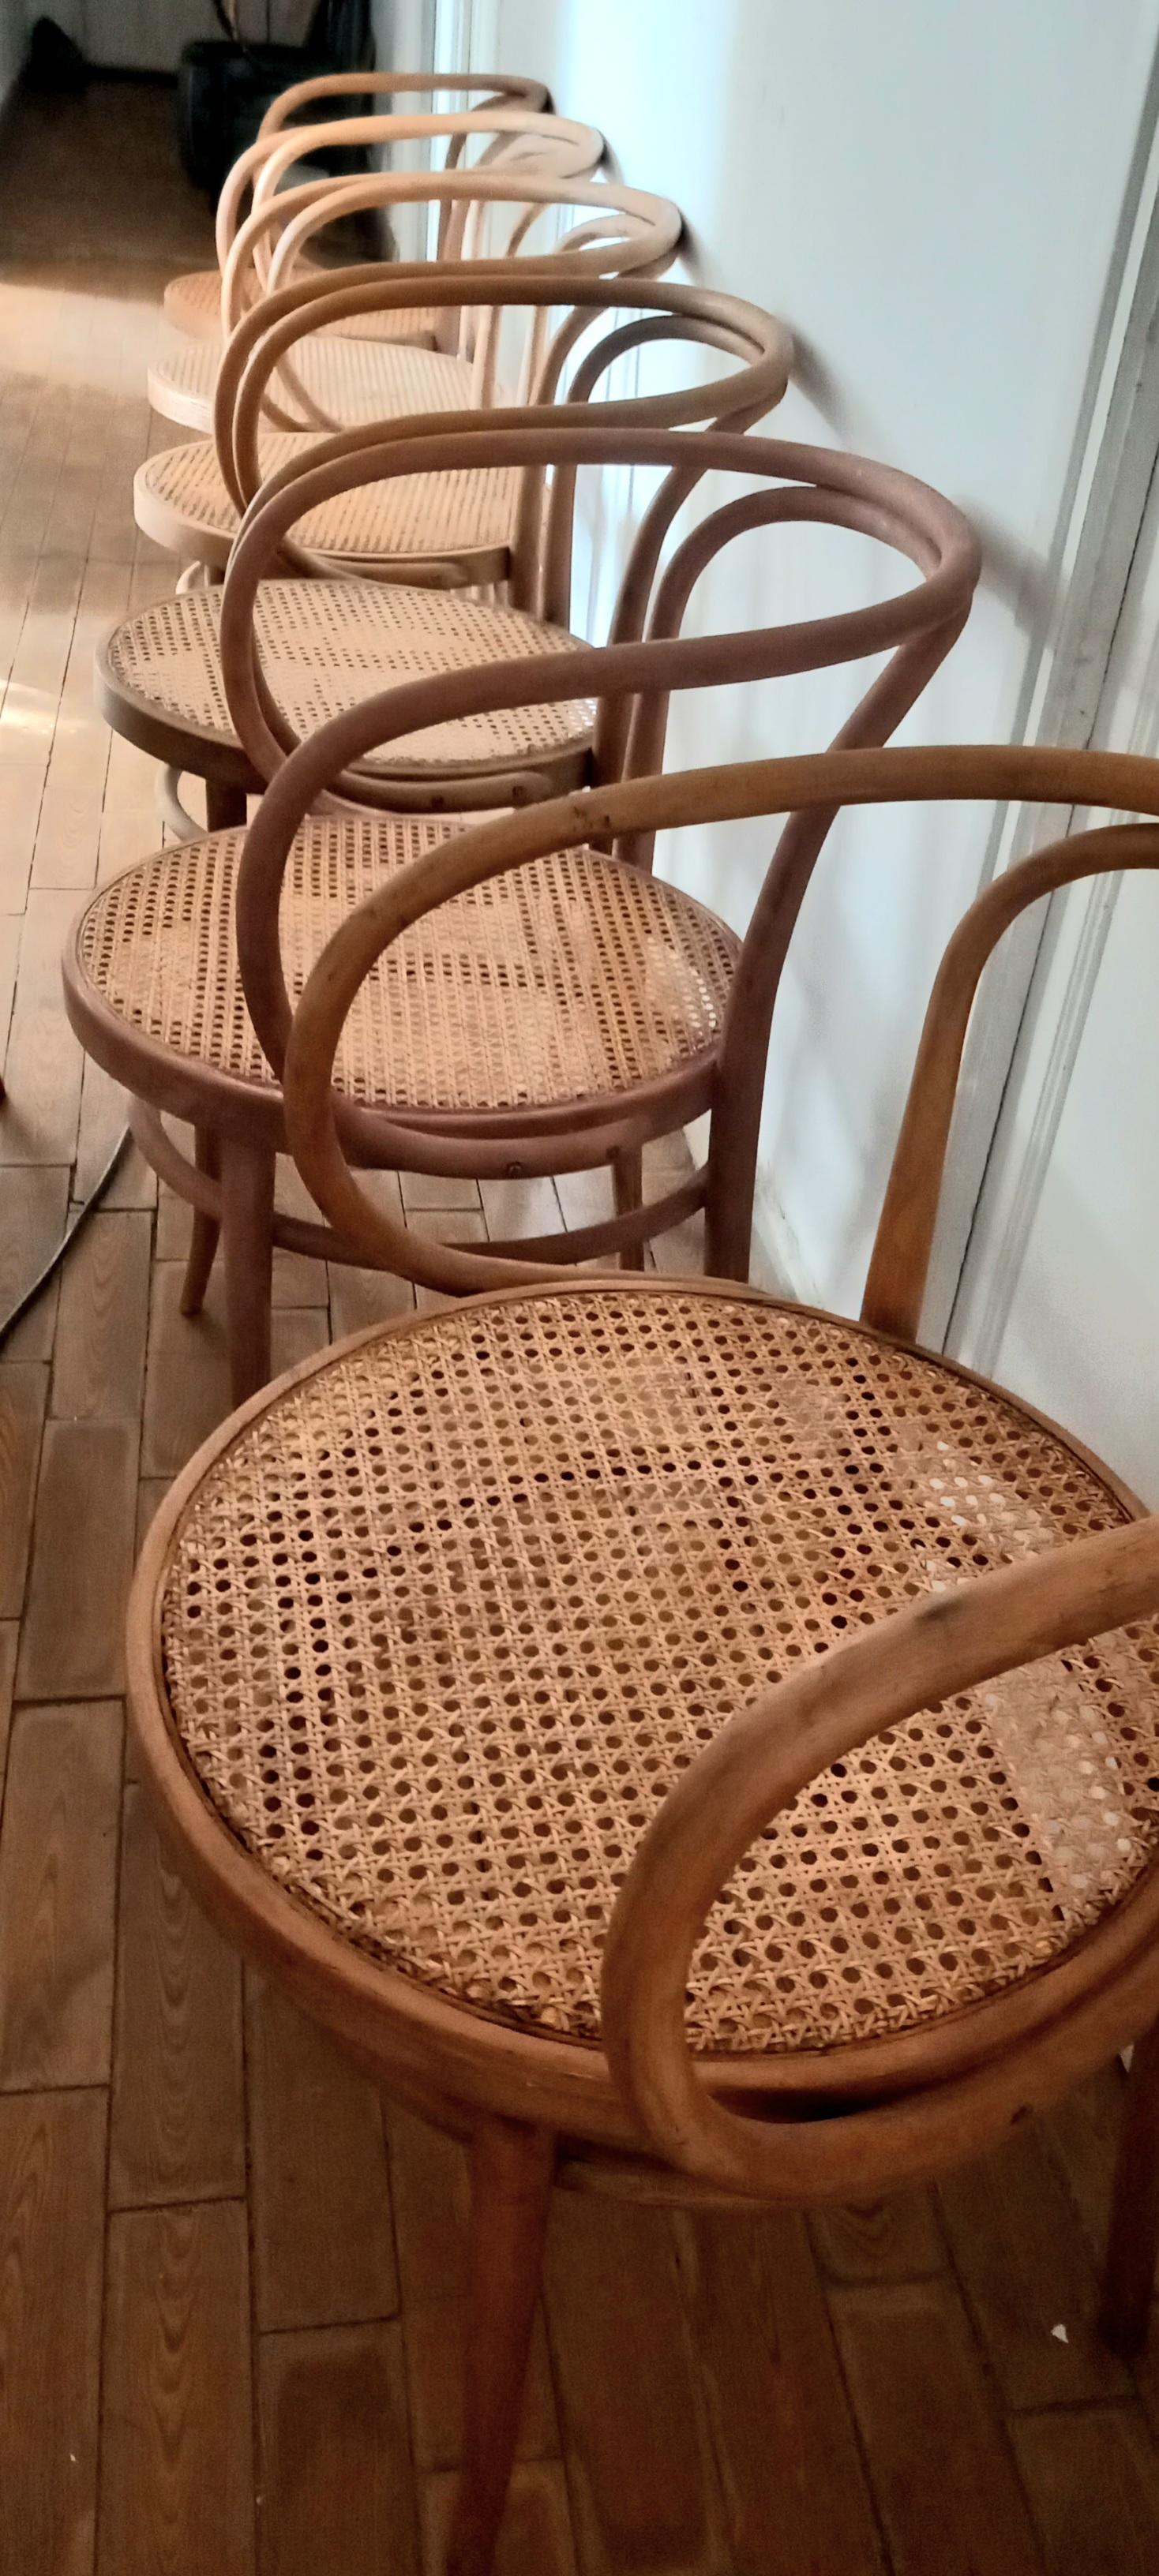 Thonet 209 Cane Bentwood Chairs After Thonet 209, 1950s For Sale 3